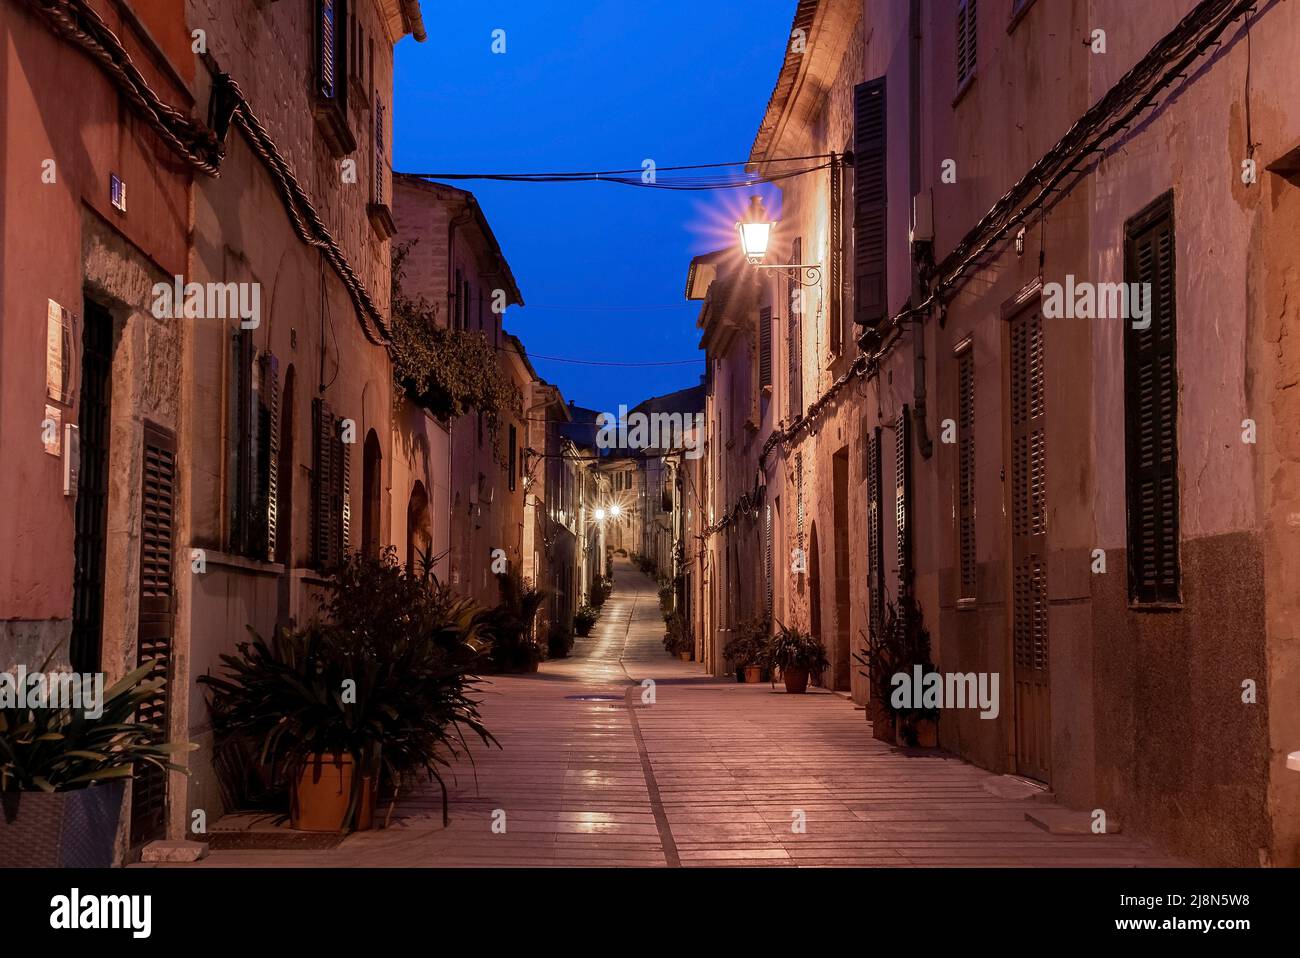 Illuminated empty alley amidst plants and buildings in old town at night Stock Photo